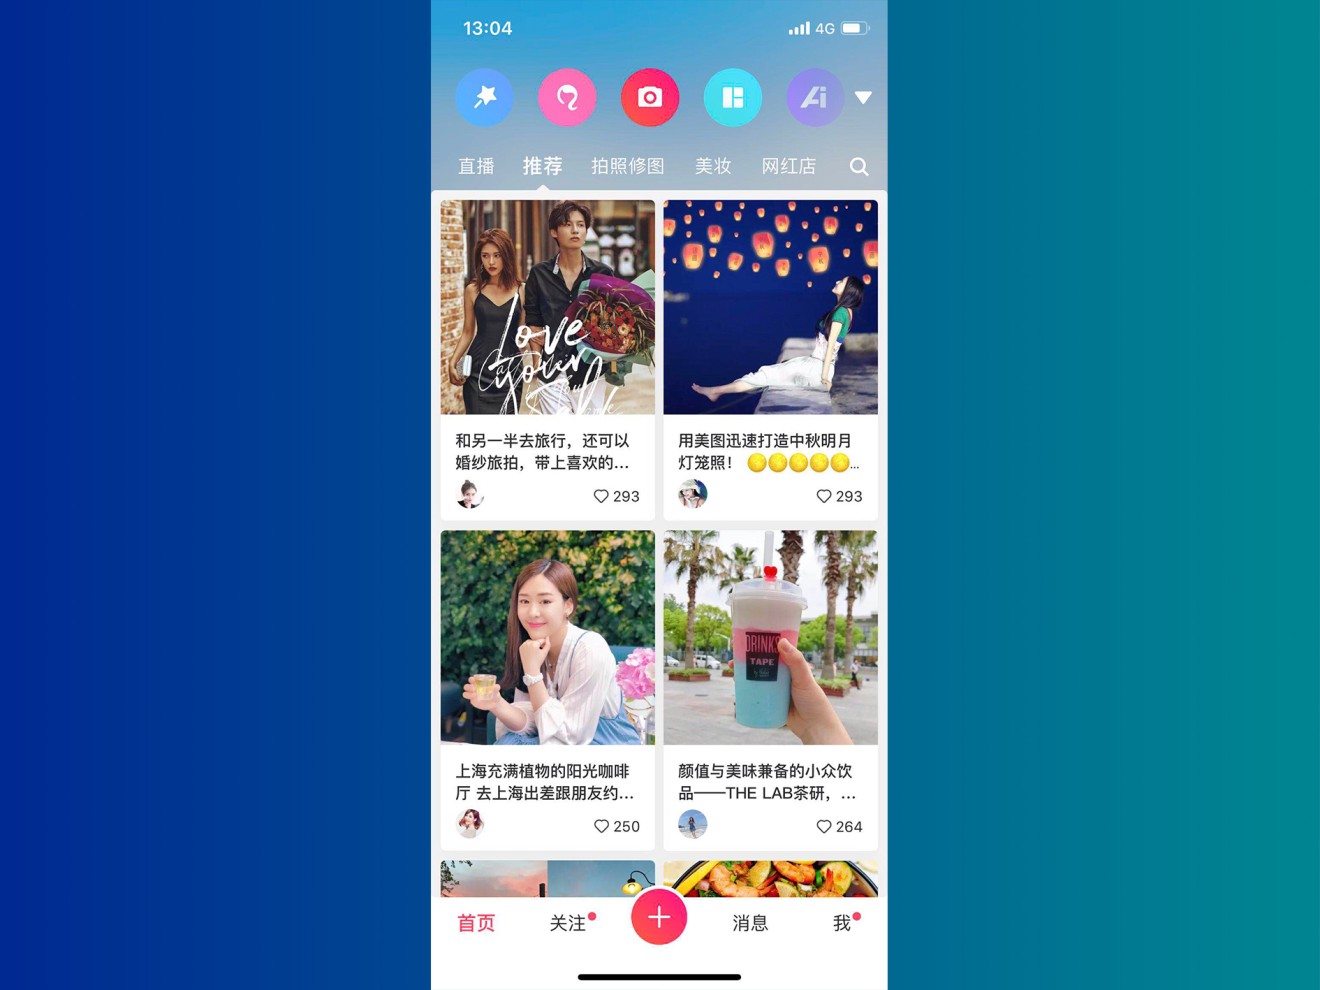 Meitu’s new social feed has pictures of travel, food, makeup and fashion tips. (Picture: Meitu)